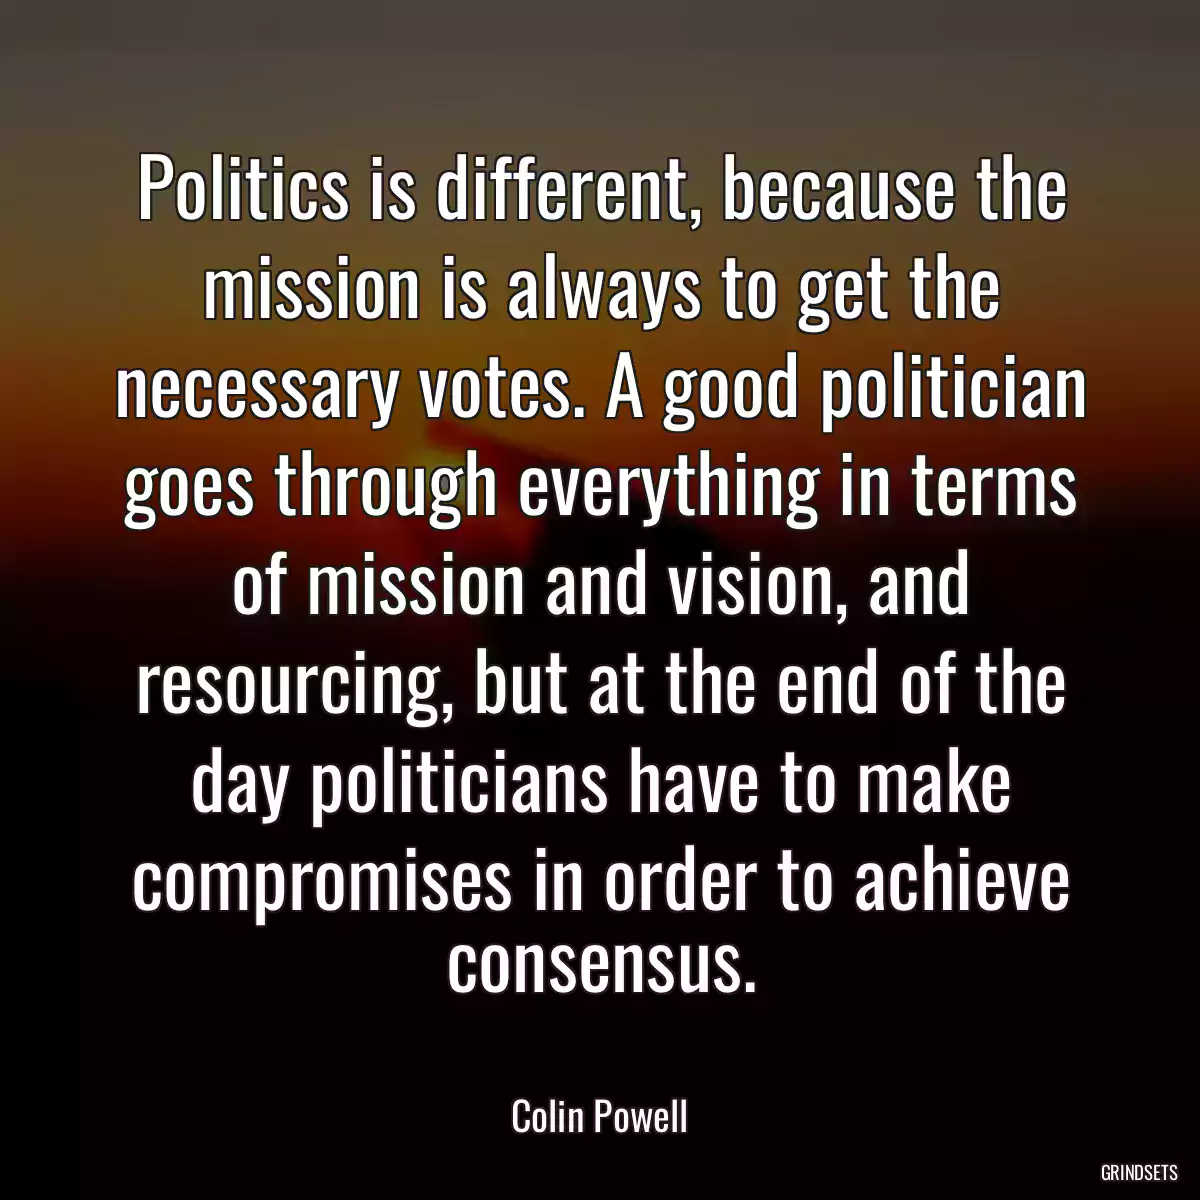 Politics is different, because the mission is always to get the necessary votes. A good politician goes through everything in terms of mission and vision, and resourcing, but at the end of the day politicians have to make compromises in order to achieve consensus.